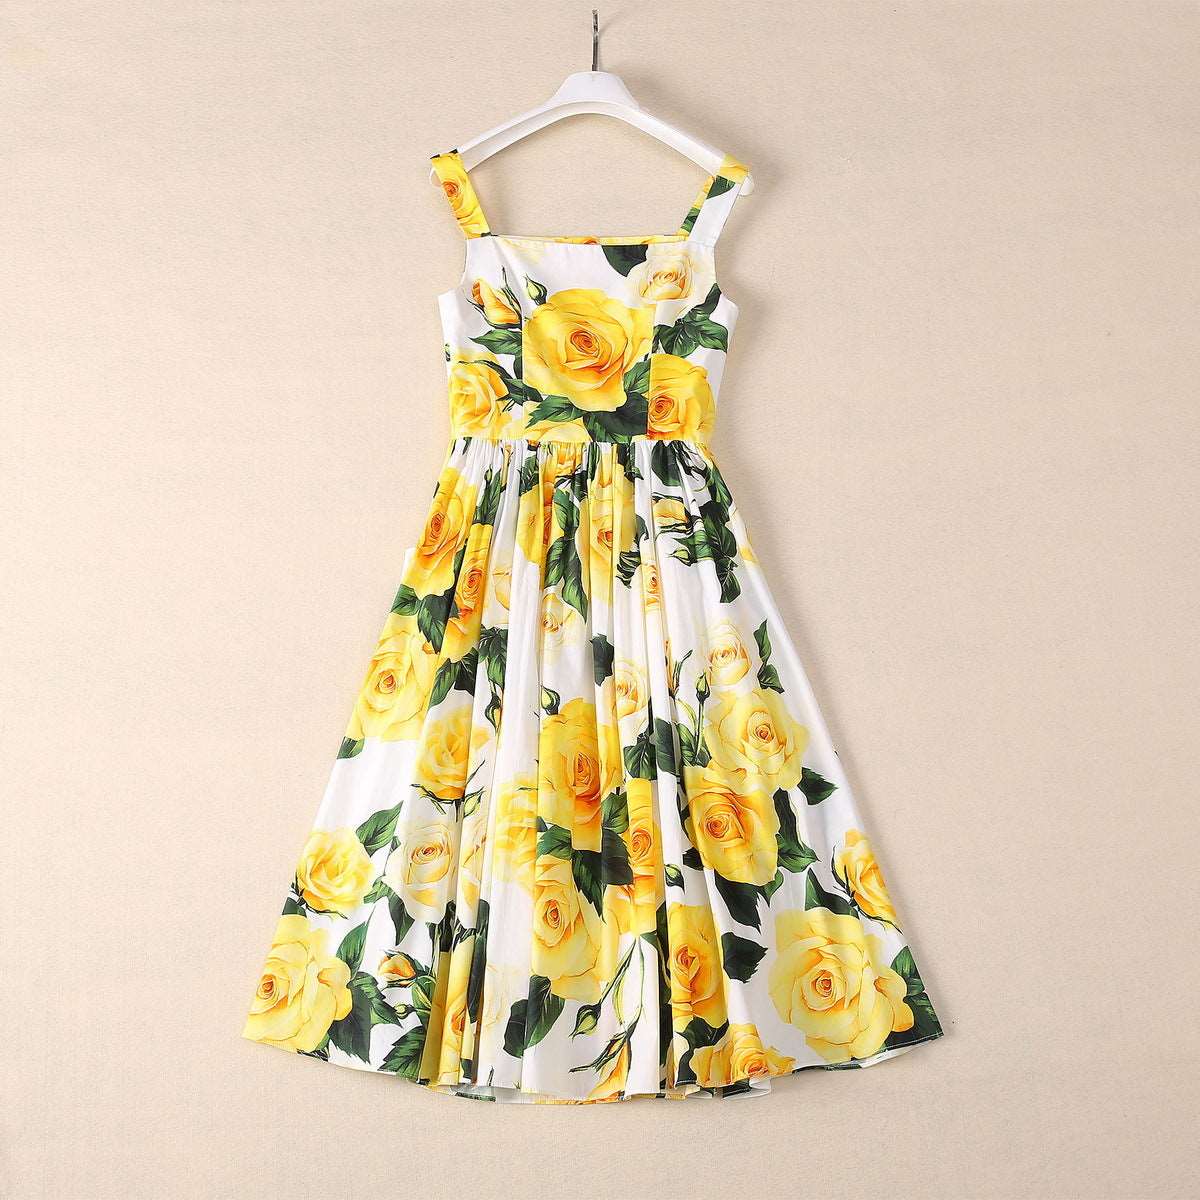 Women's Buttons Swing Dress with Pockets